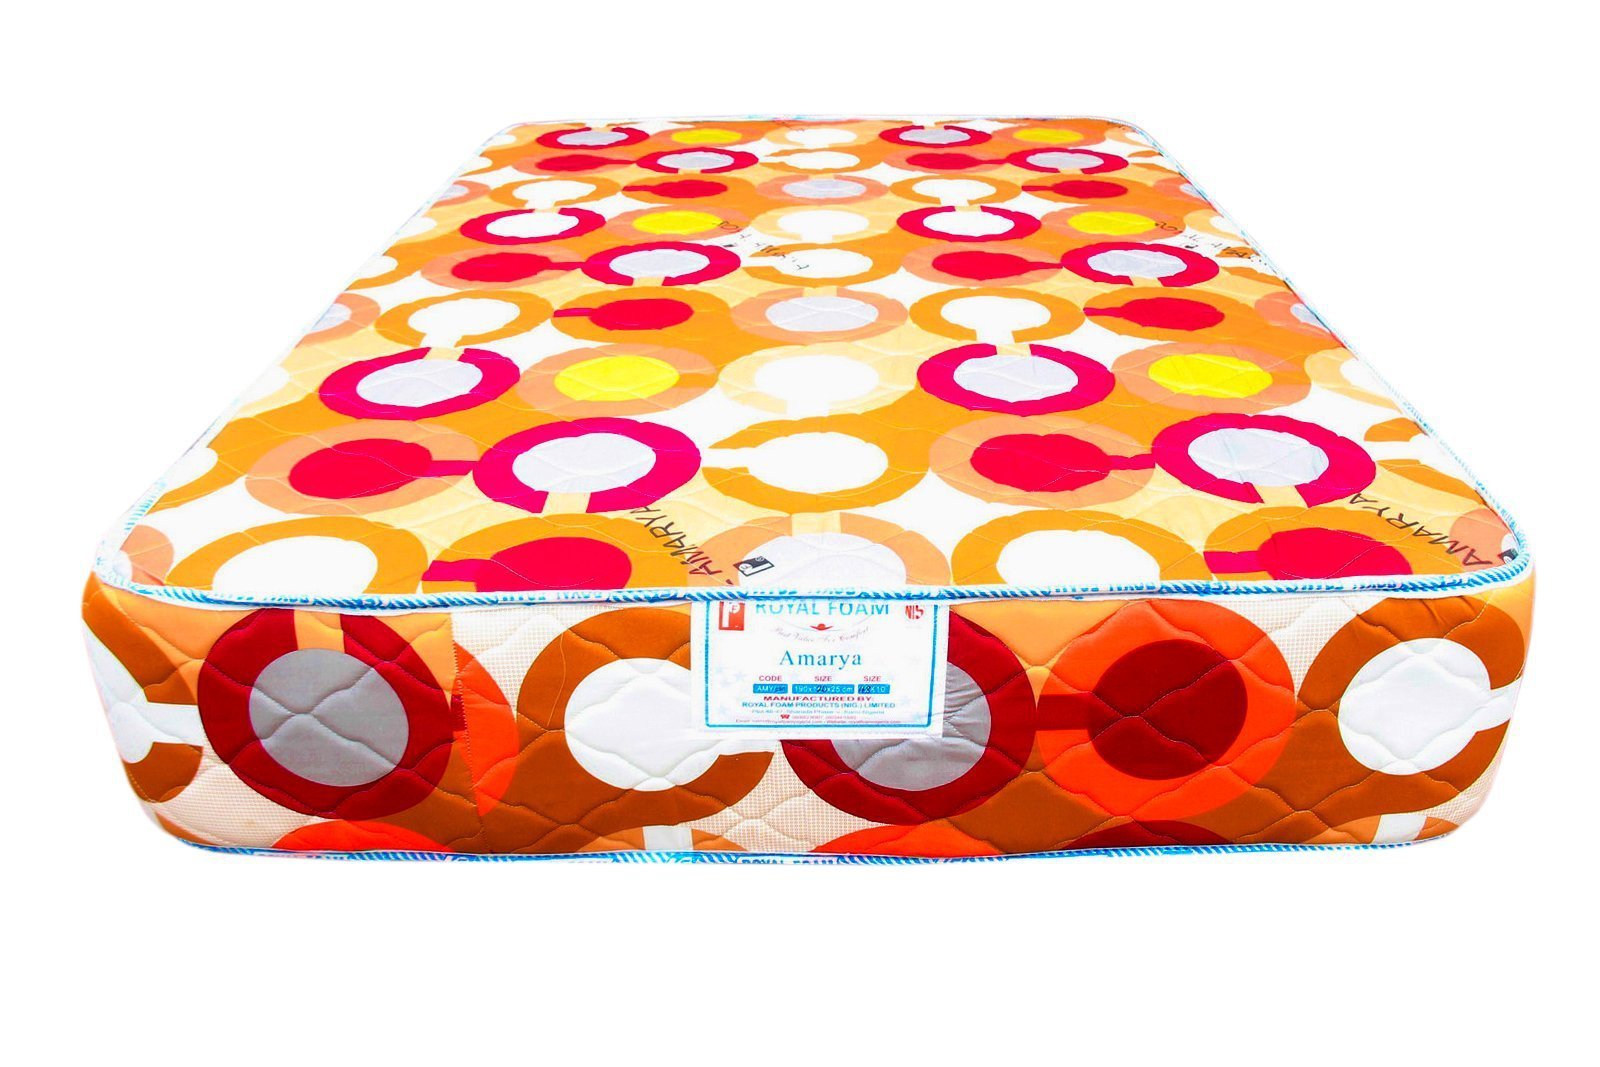 Royal Amarya-Poly Cotton Fabric - 14 Density foam - Fully Quilted Mattress -190X90X10CM [75 x 36 x 4"] [6ft x 3ft x 4inches]